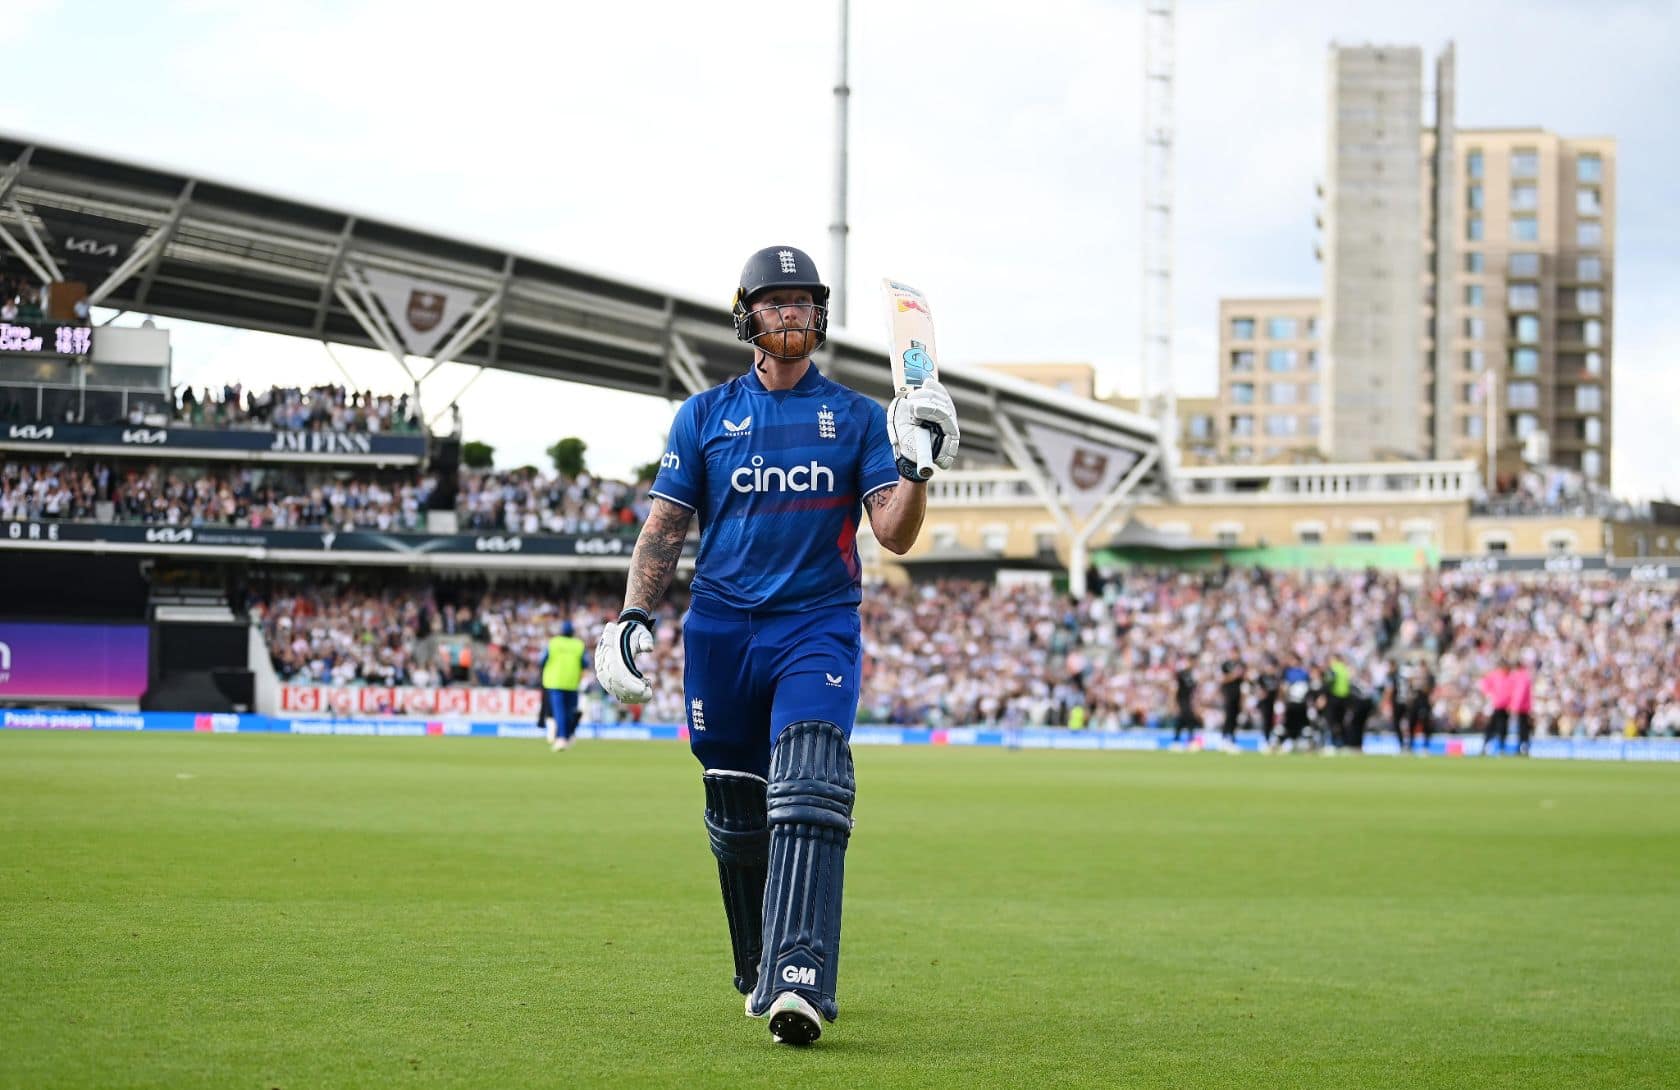 'I Have a Clarity of Thought': Ben Stokes After his Record-Breaking Hundred vs NZ